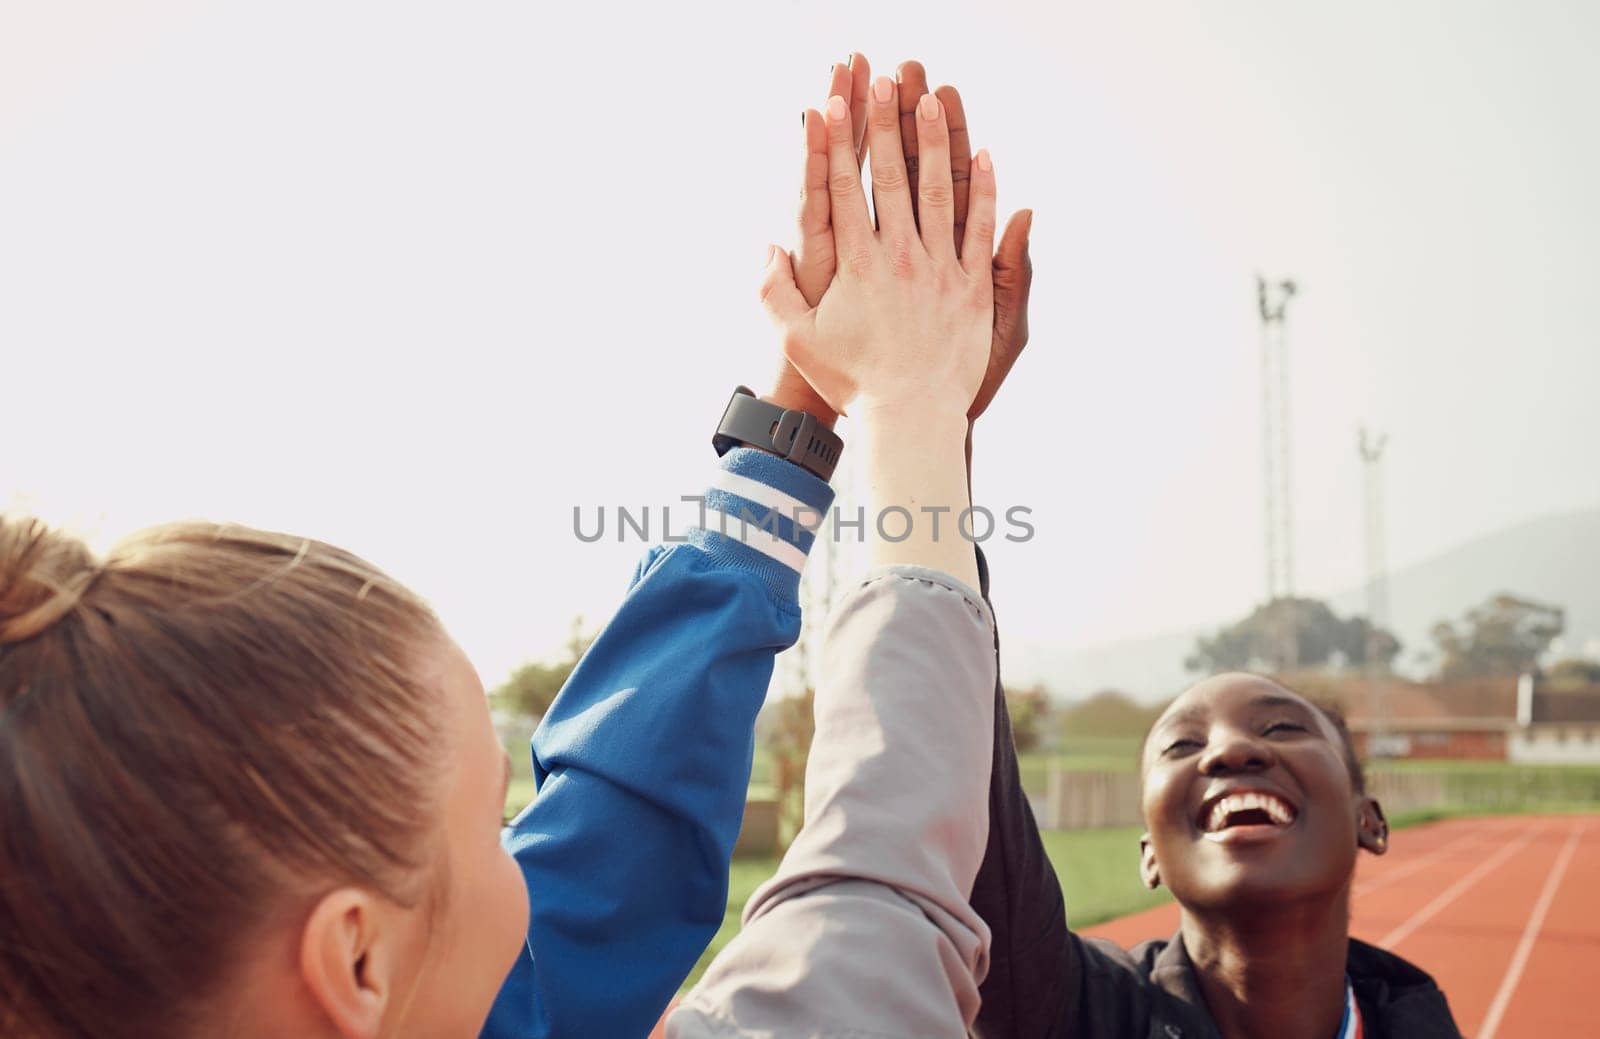 People, diversity and high five in fitness for teamwork, unity or trust together on stadium track. Happy athlete group touching hands in team building for sports motivation, support or goals outdoors by YuriArcurs